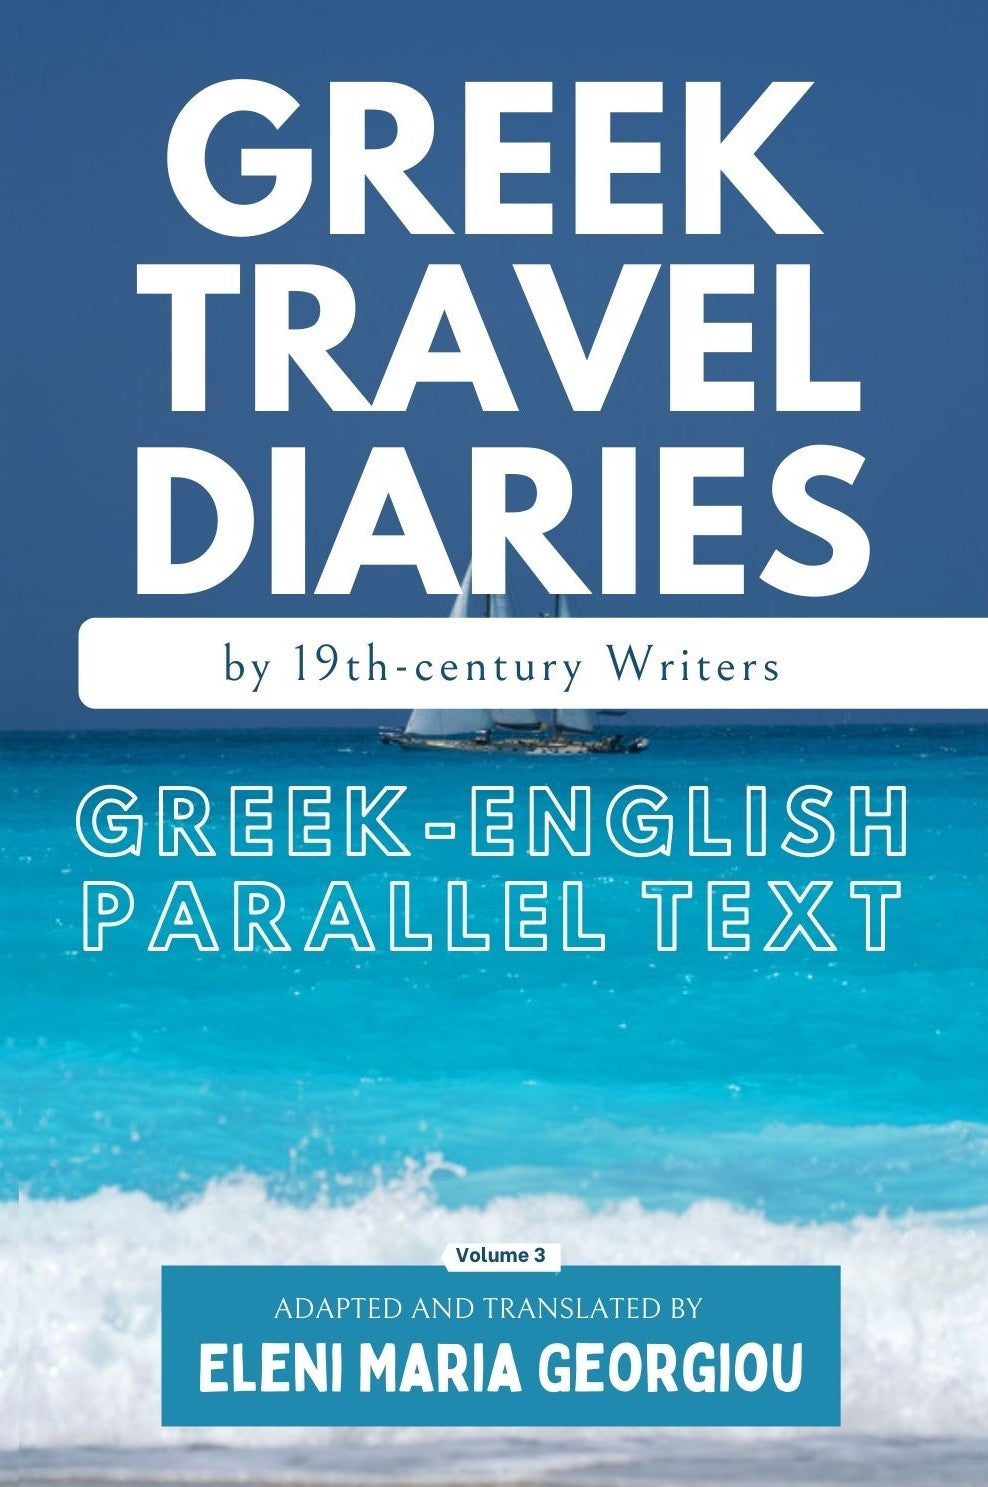 Greek Travel Diaries by 19th-century Writers: Greek-English Parallel Text - Volume 3